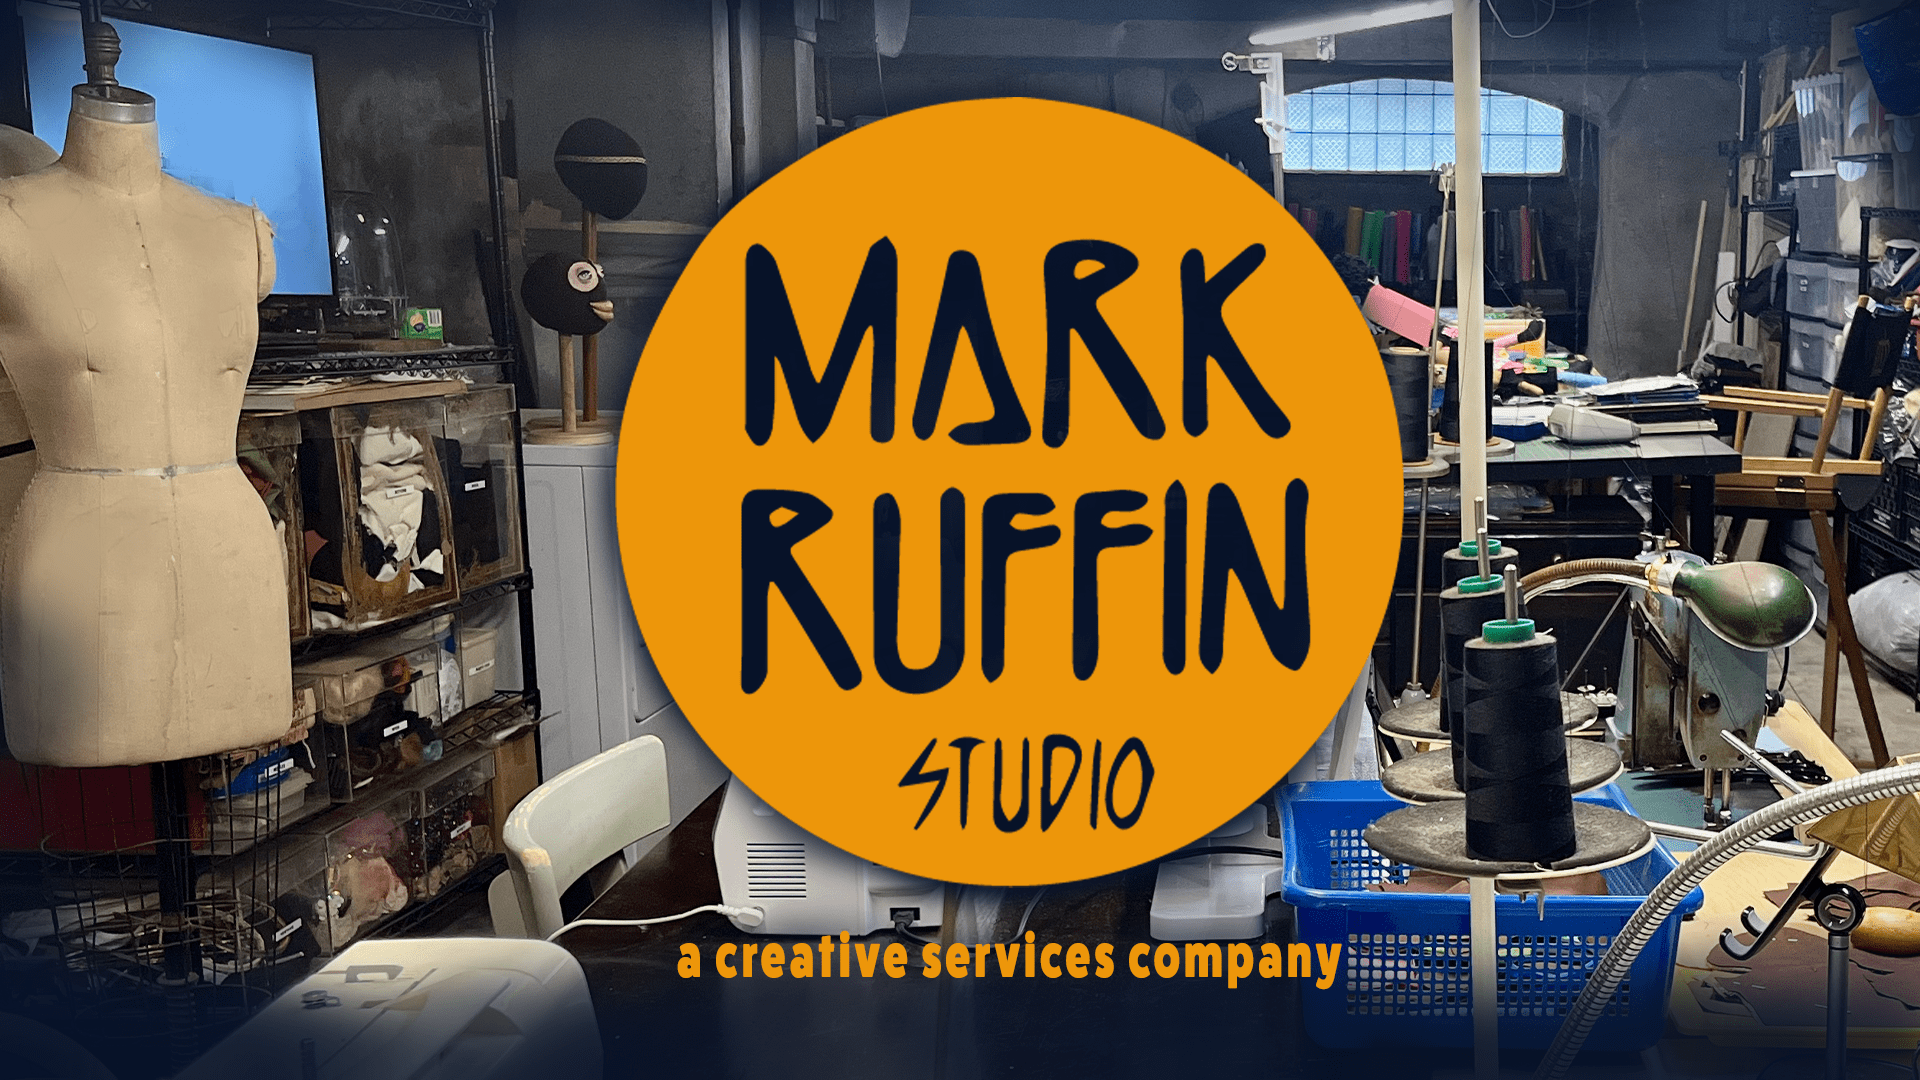 "Image of Mark Ruffin Studio: A creative services company specializing in the design and fabrication of costumes, puppets, dolls, and props. The studio is depicted as a vibrant workspace with artists working on various projects, surrounded by materials and tools for crafting costumes, puppets, dolls, and props."